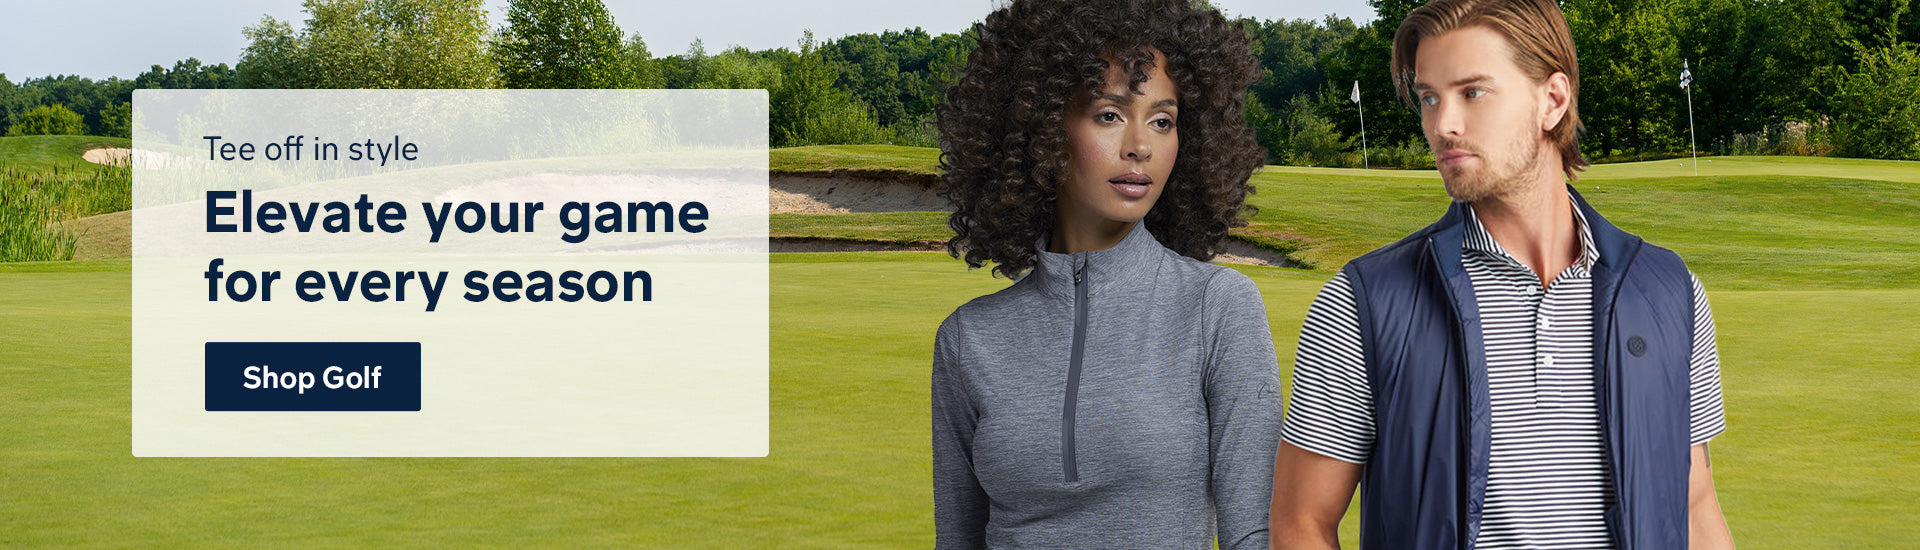 Golf Desktop Homepage Banner Featuring Man and Woman in Golf Gear